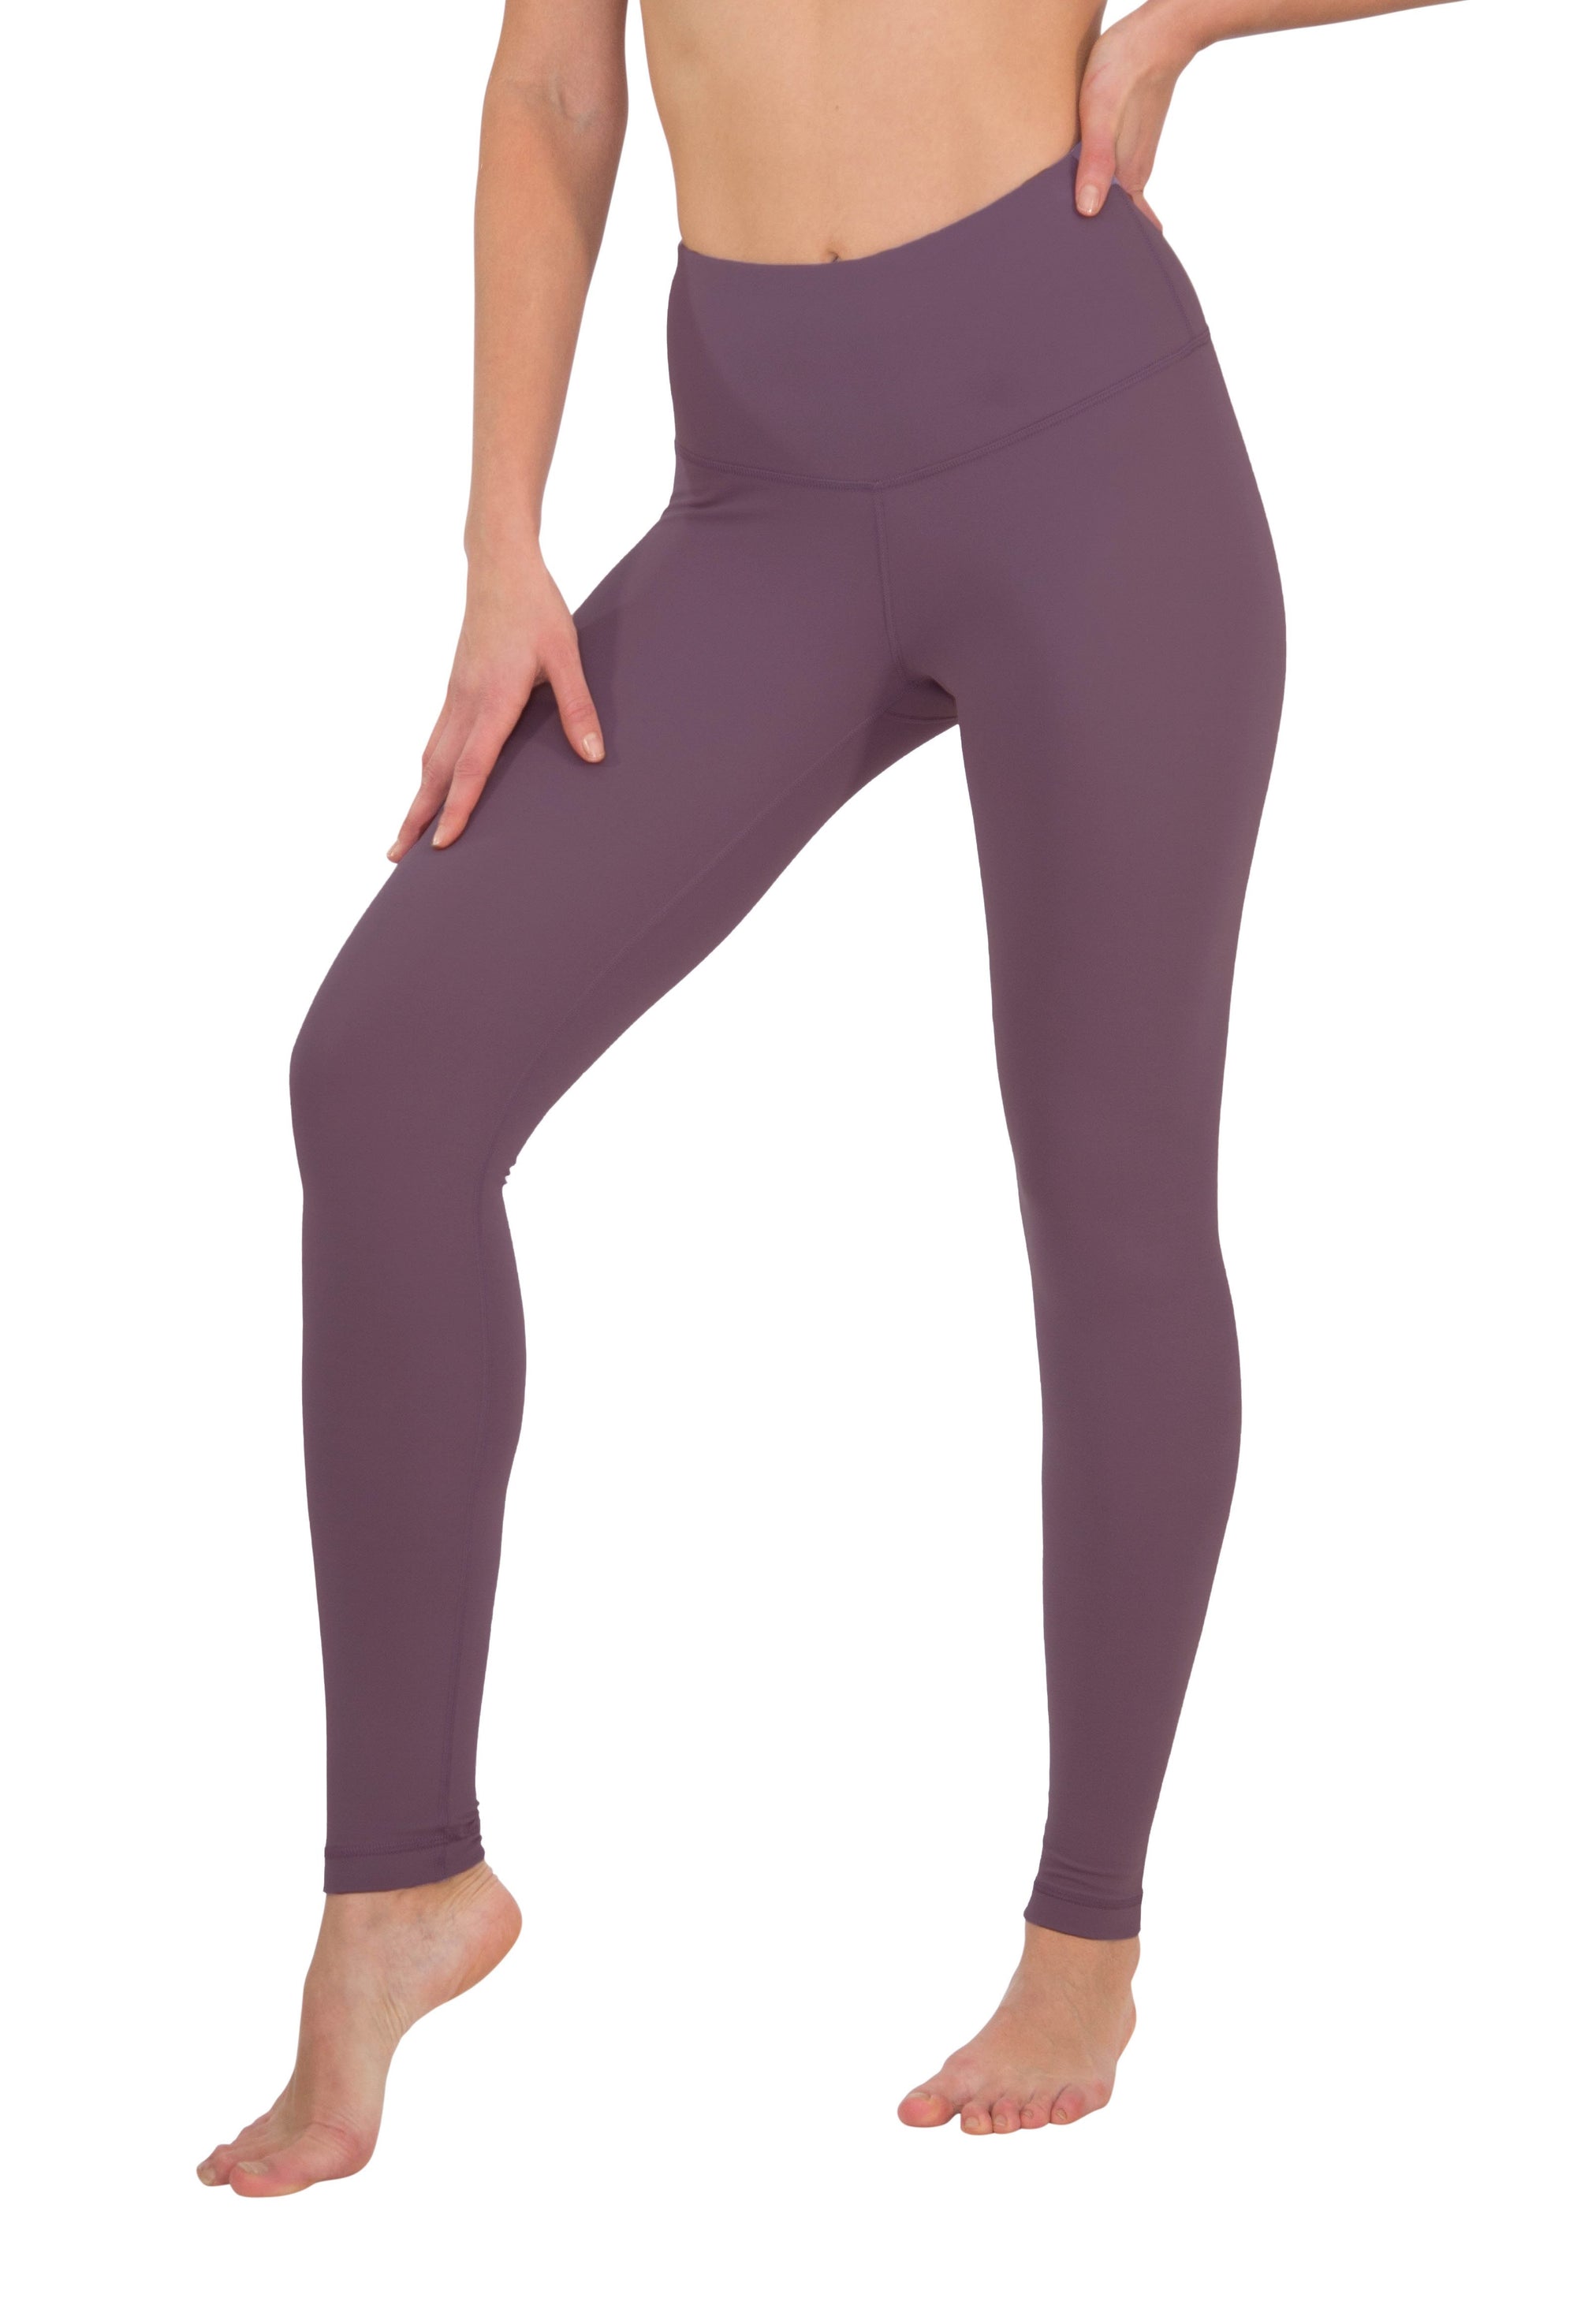 RYDCOT Women's Activewear Leggings Solid Color Seamless High Waist